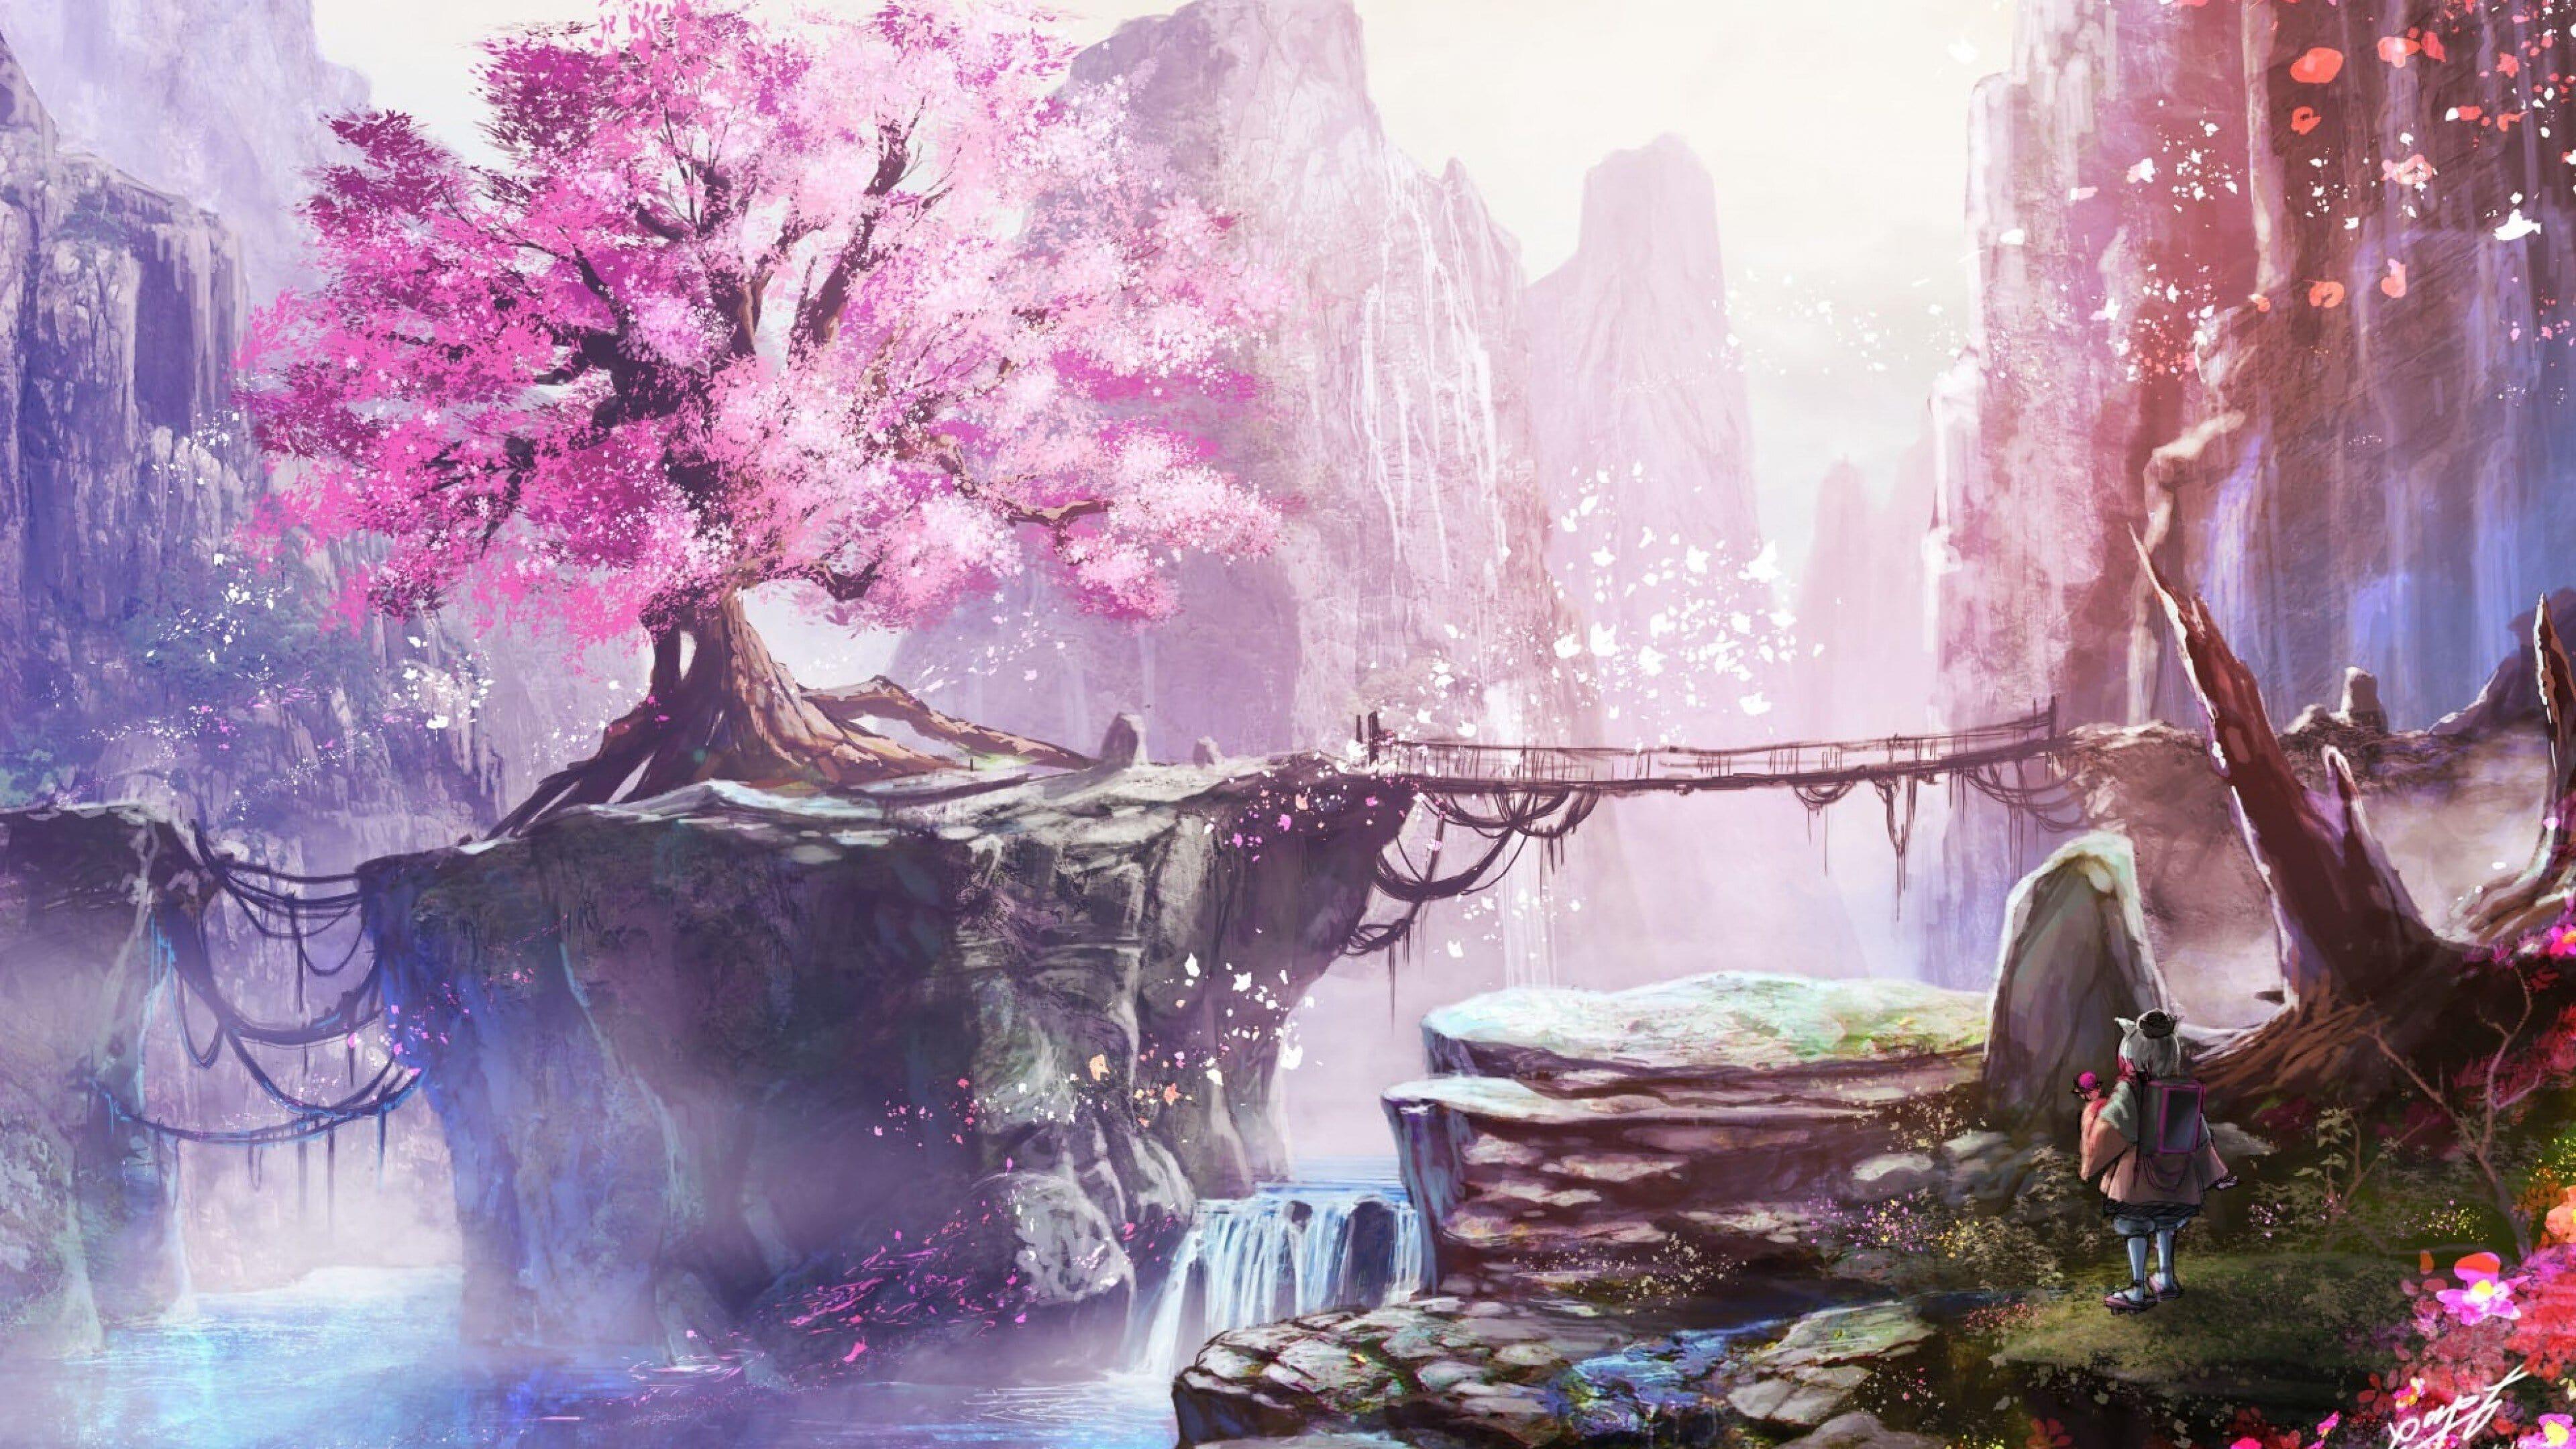 1920x1200 anime, fantasy, girl, tree, bridge, water, rocks, mountains, flowers, petals, pink, full HD, 2K, 16:9, 16:10, 5:3, 4:3, wallpaper, background, image, picture - Cherry blossom, anime landscape